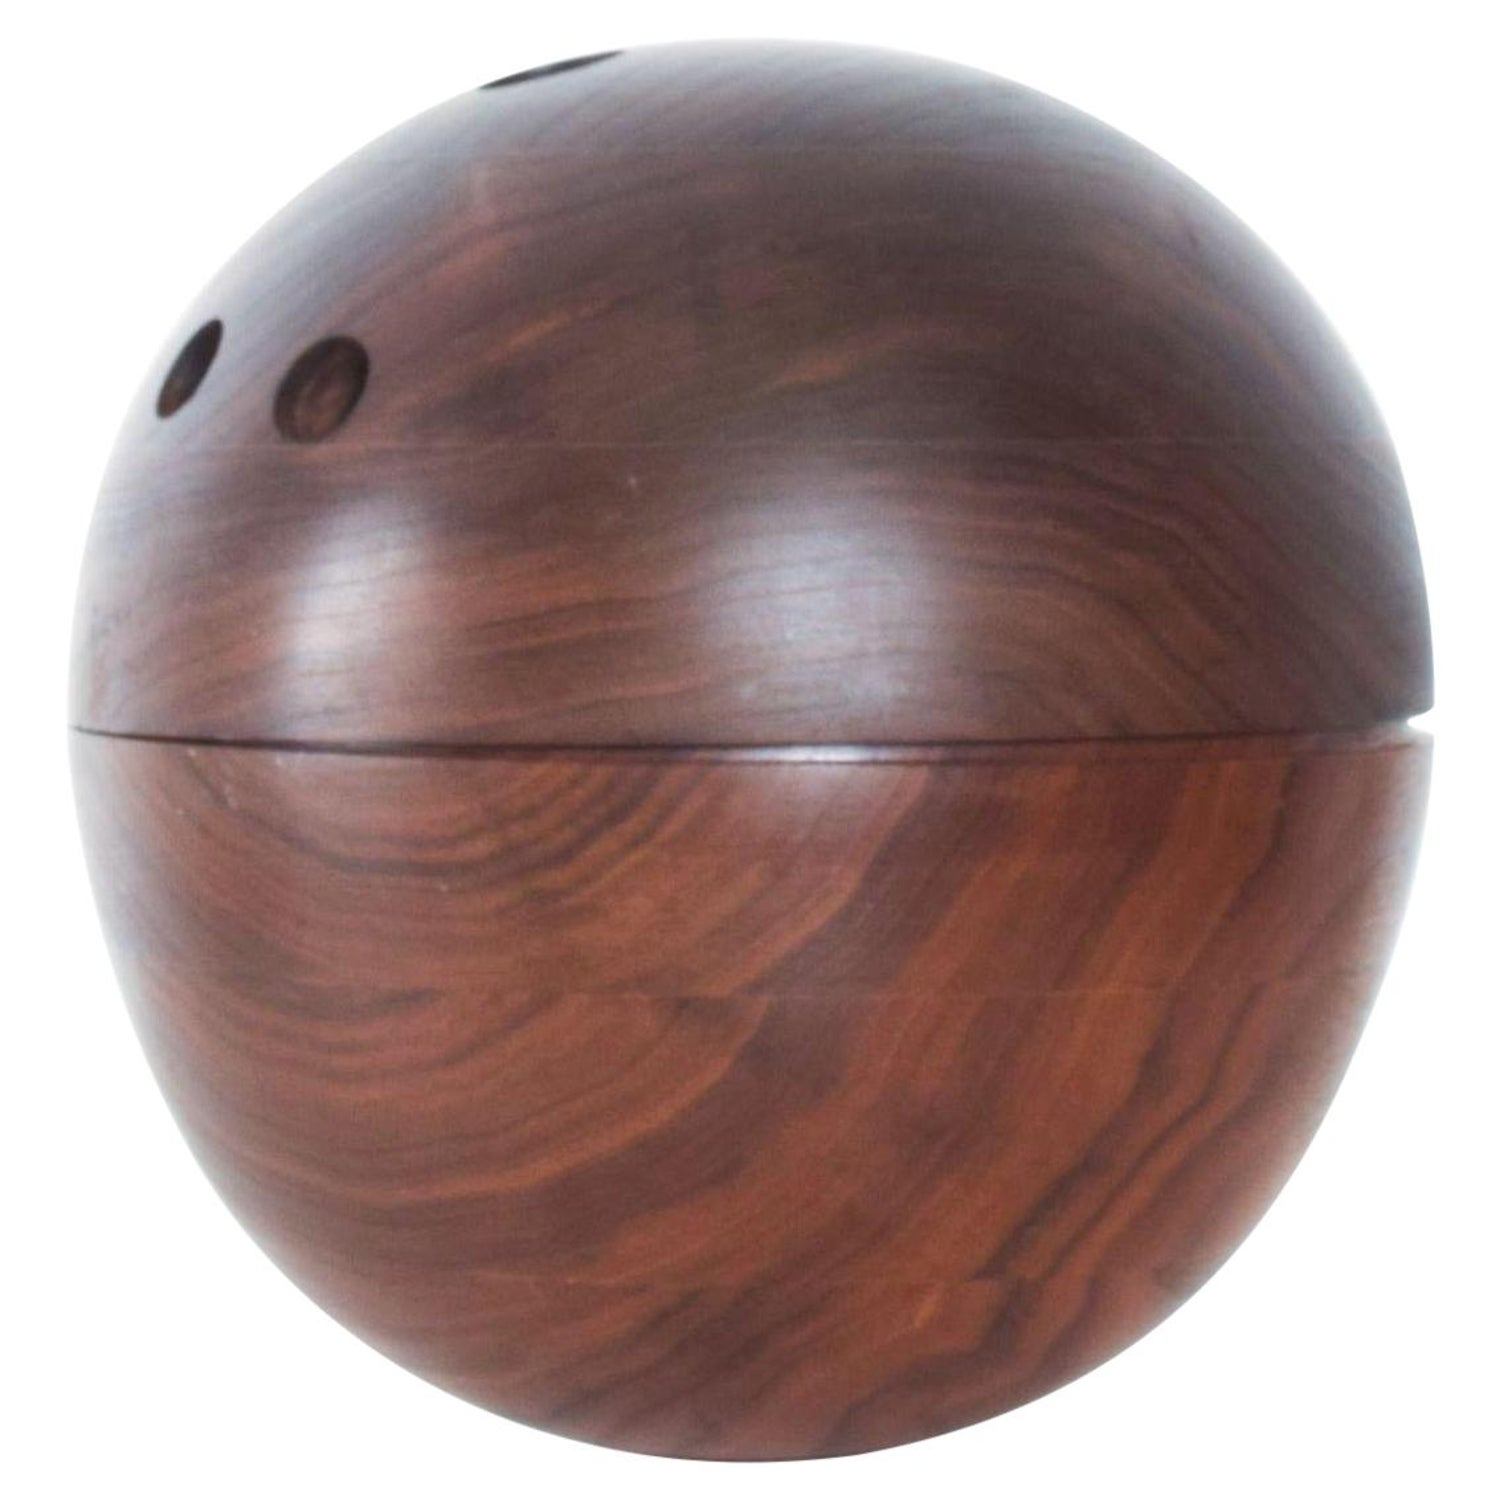 Bowling Ball Used - 4 For Sale on 1stDibs